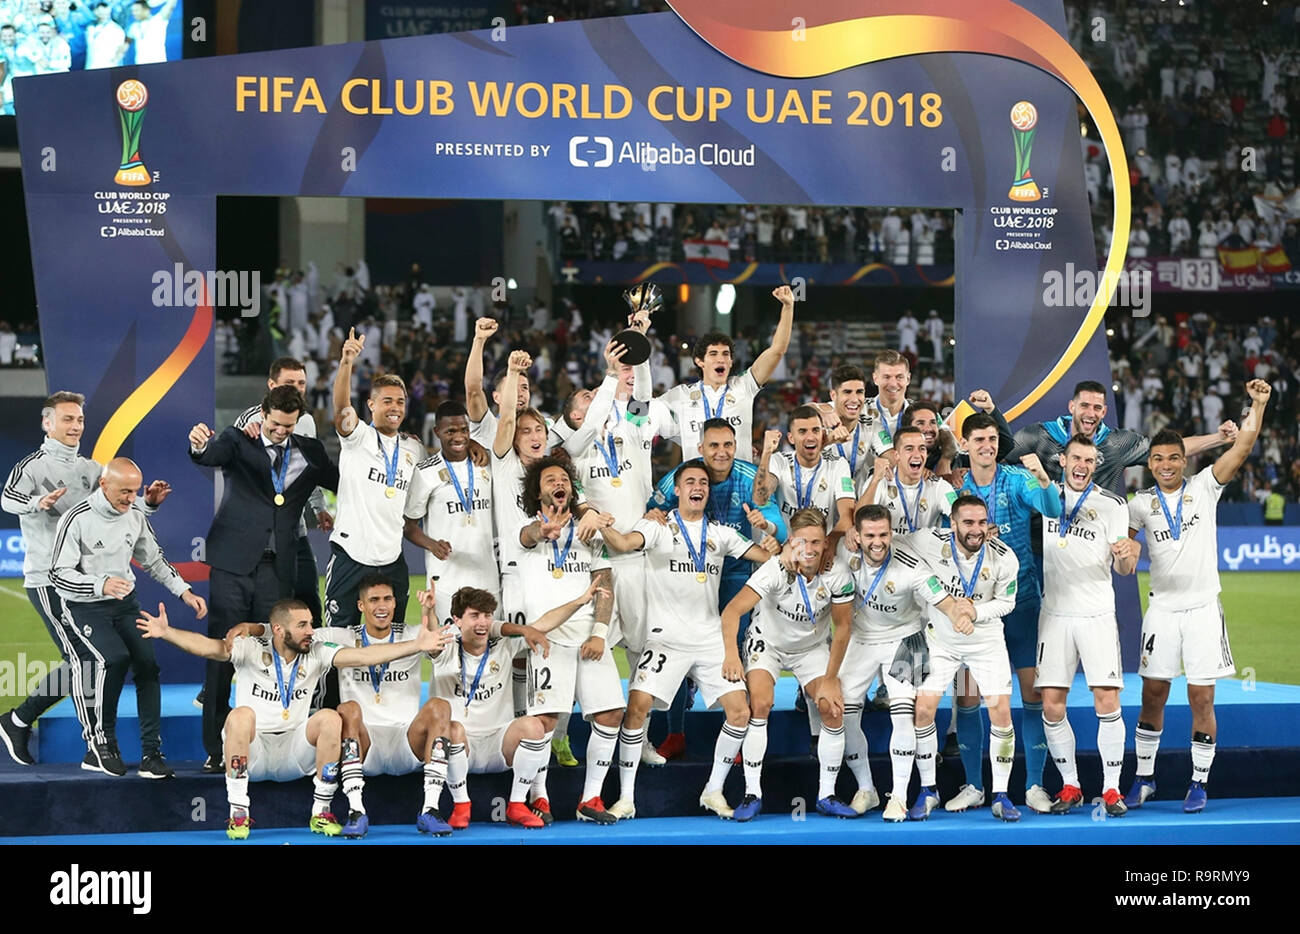 Beijing Dec 27 18 Xinhua Photo Taken On Dec 22 18 Shows Players Of Real Madrid Posing For Photos During The Awarding Ceremony Of Fifa Club World Cup Final